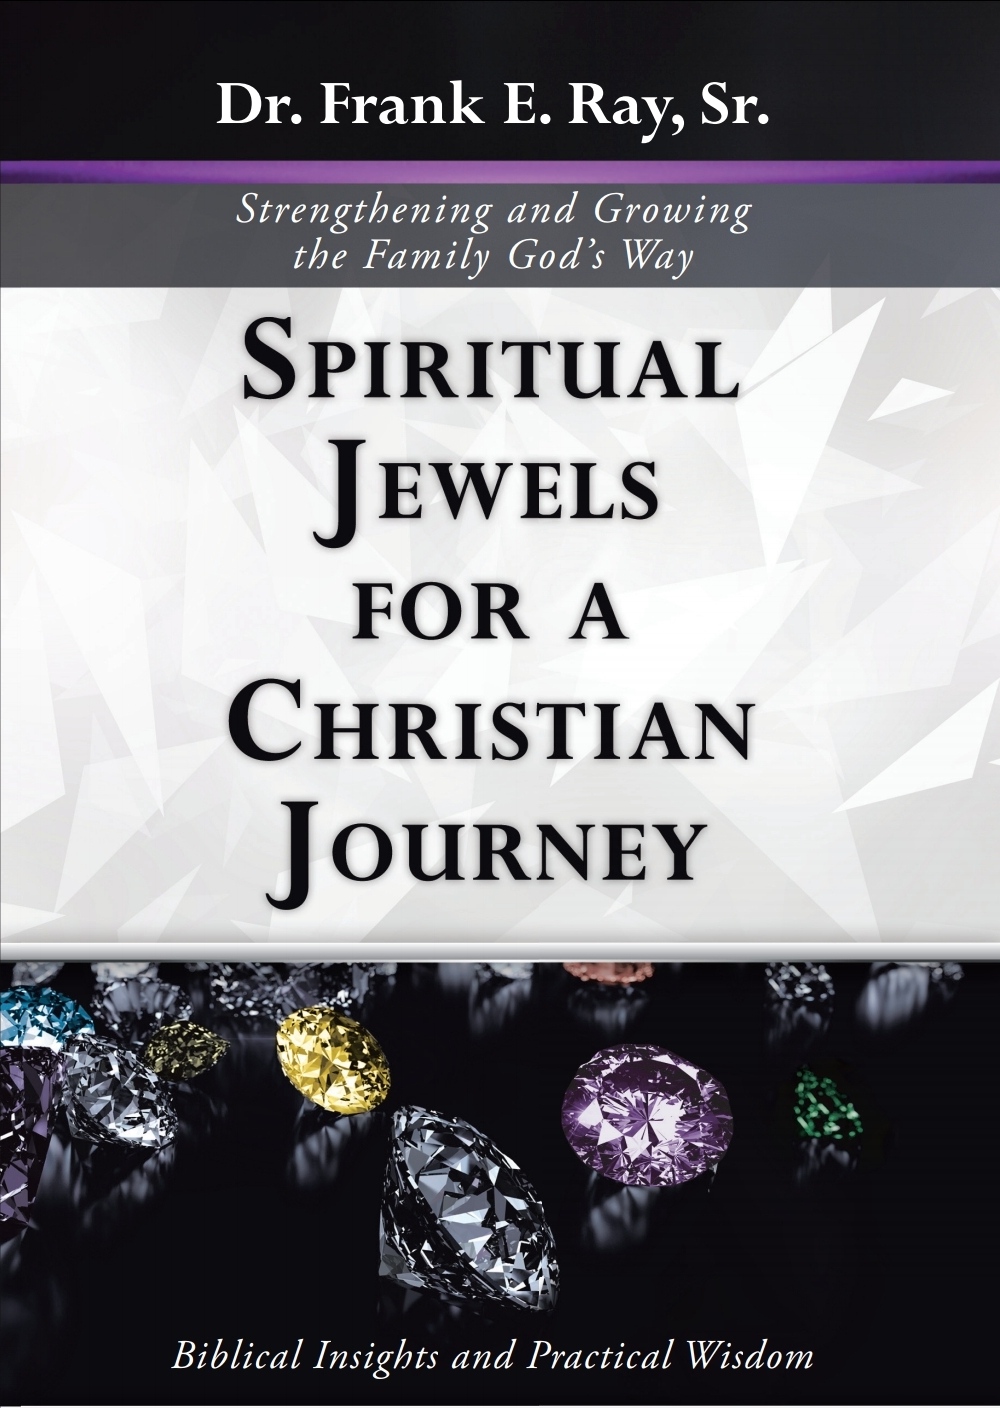 Dr. Ray's Spiritual Jewels For A Christian Journey - Bookstore Pickup